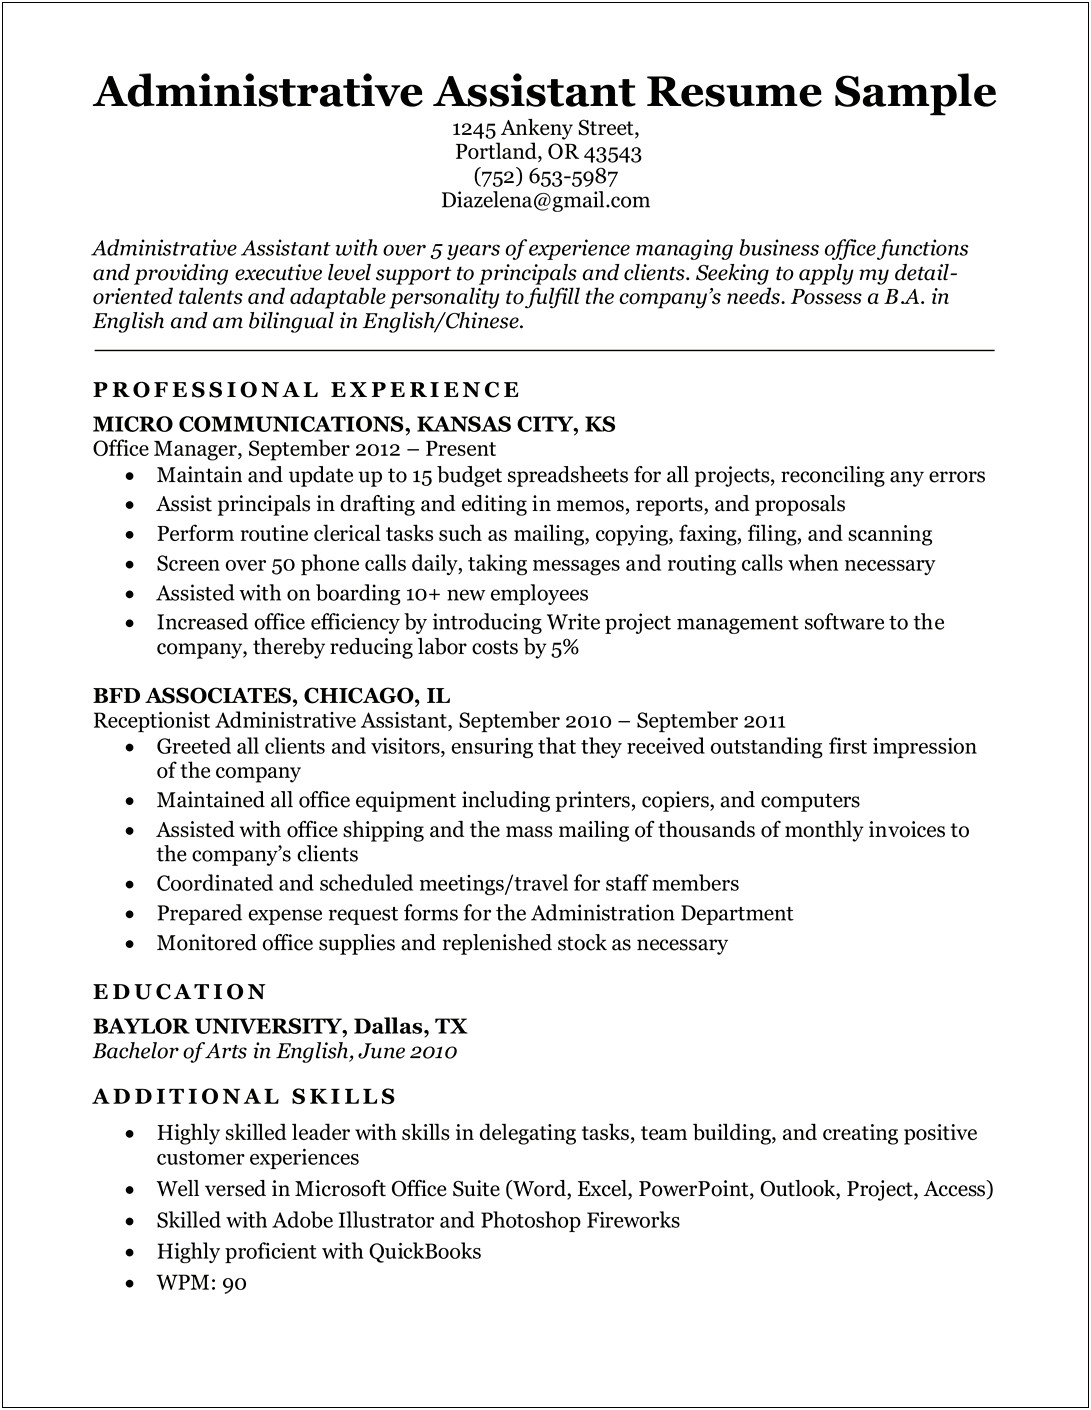 Example Work Experience For Office Assistant For Resume